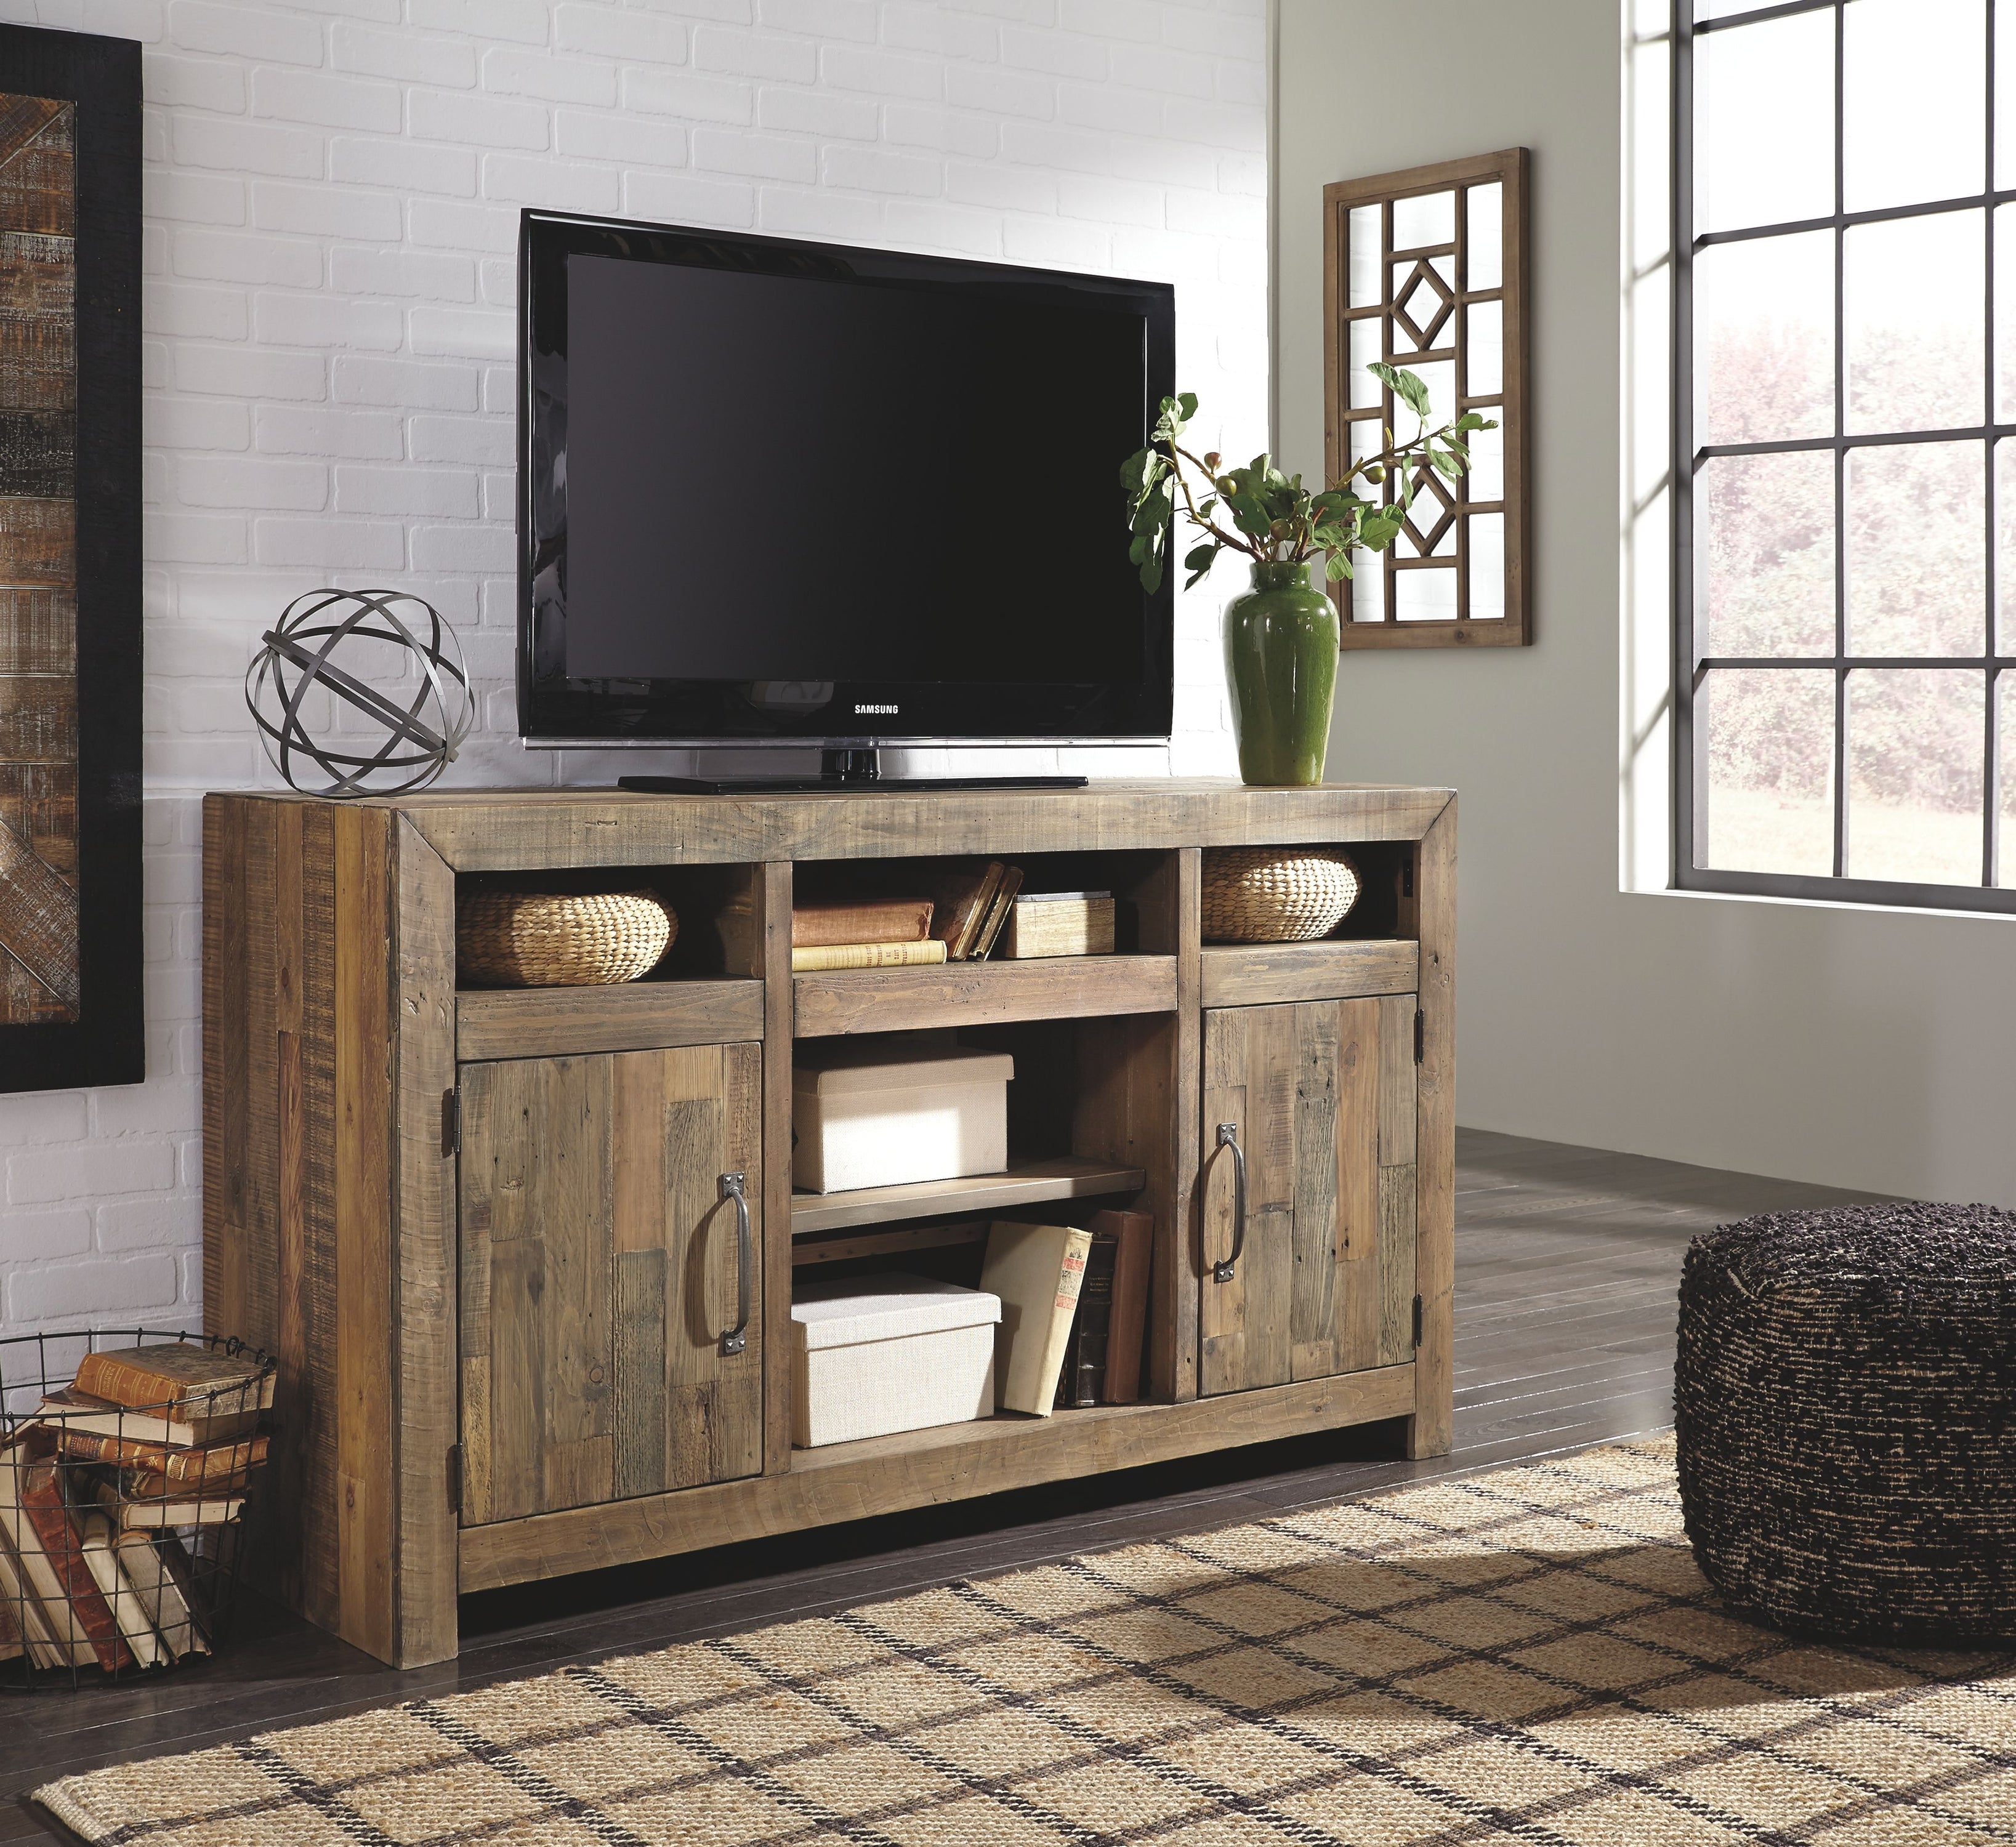 Sommerford - Brown - LG TV Stand W/Fireplace Option